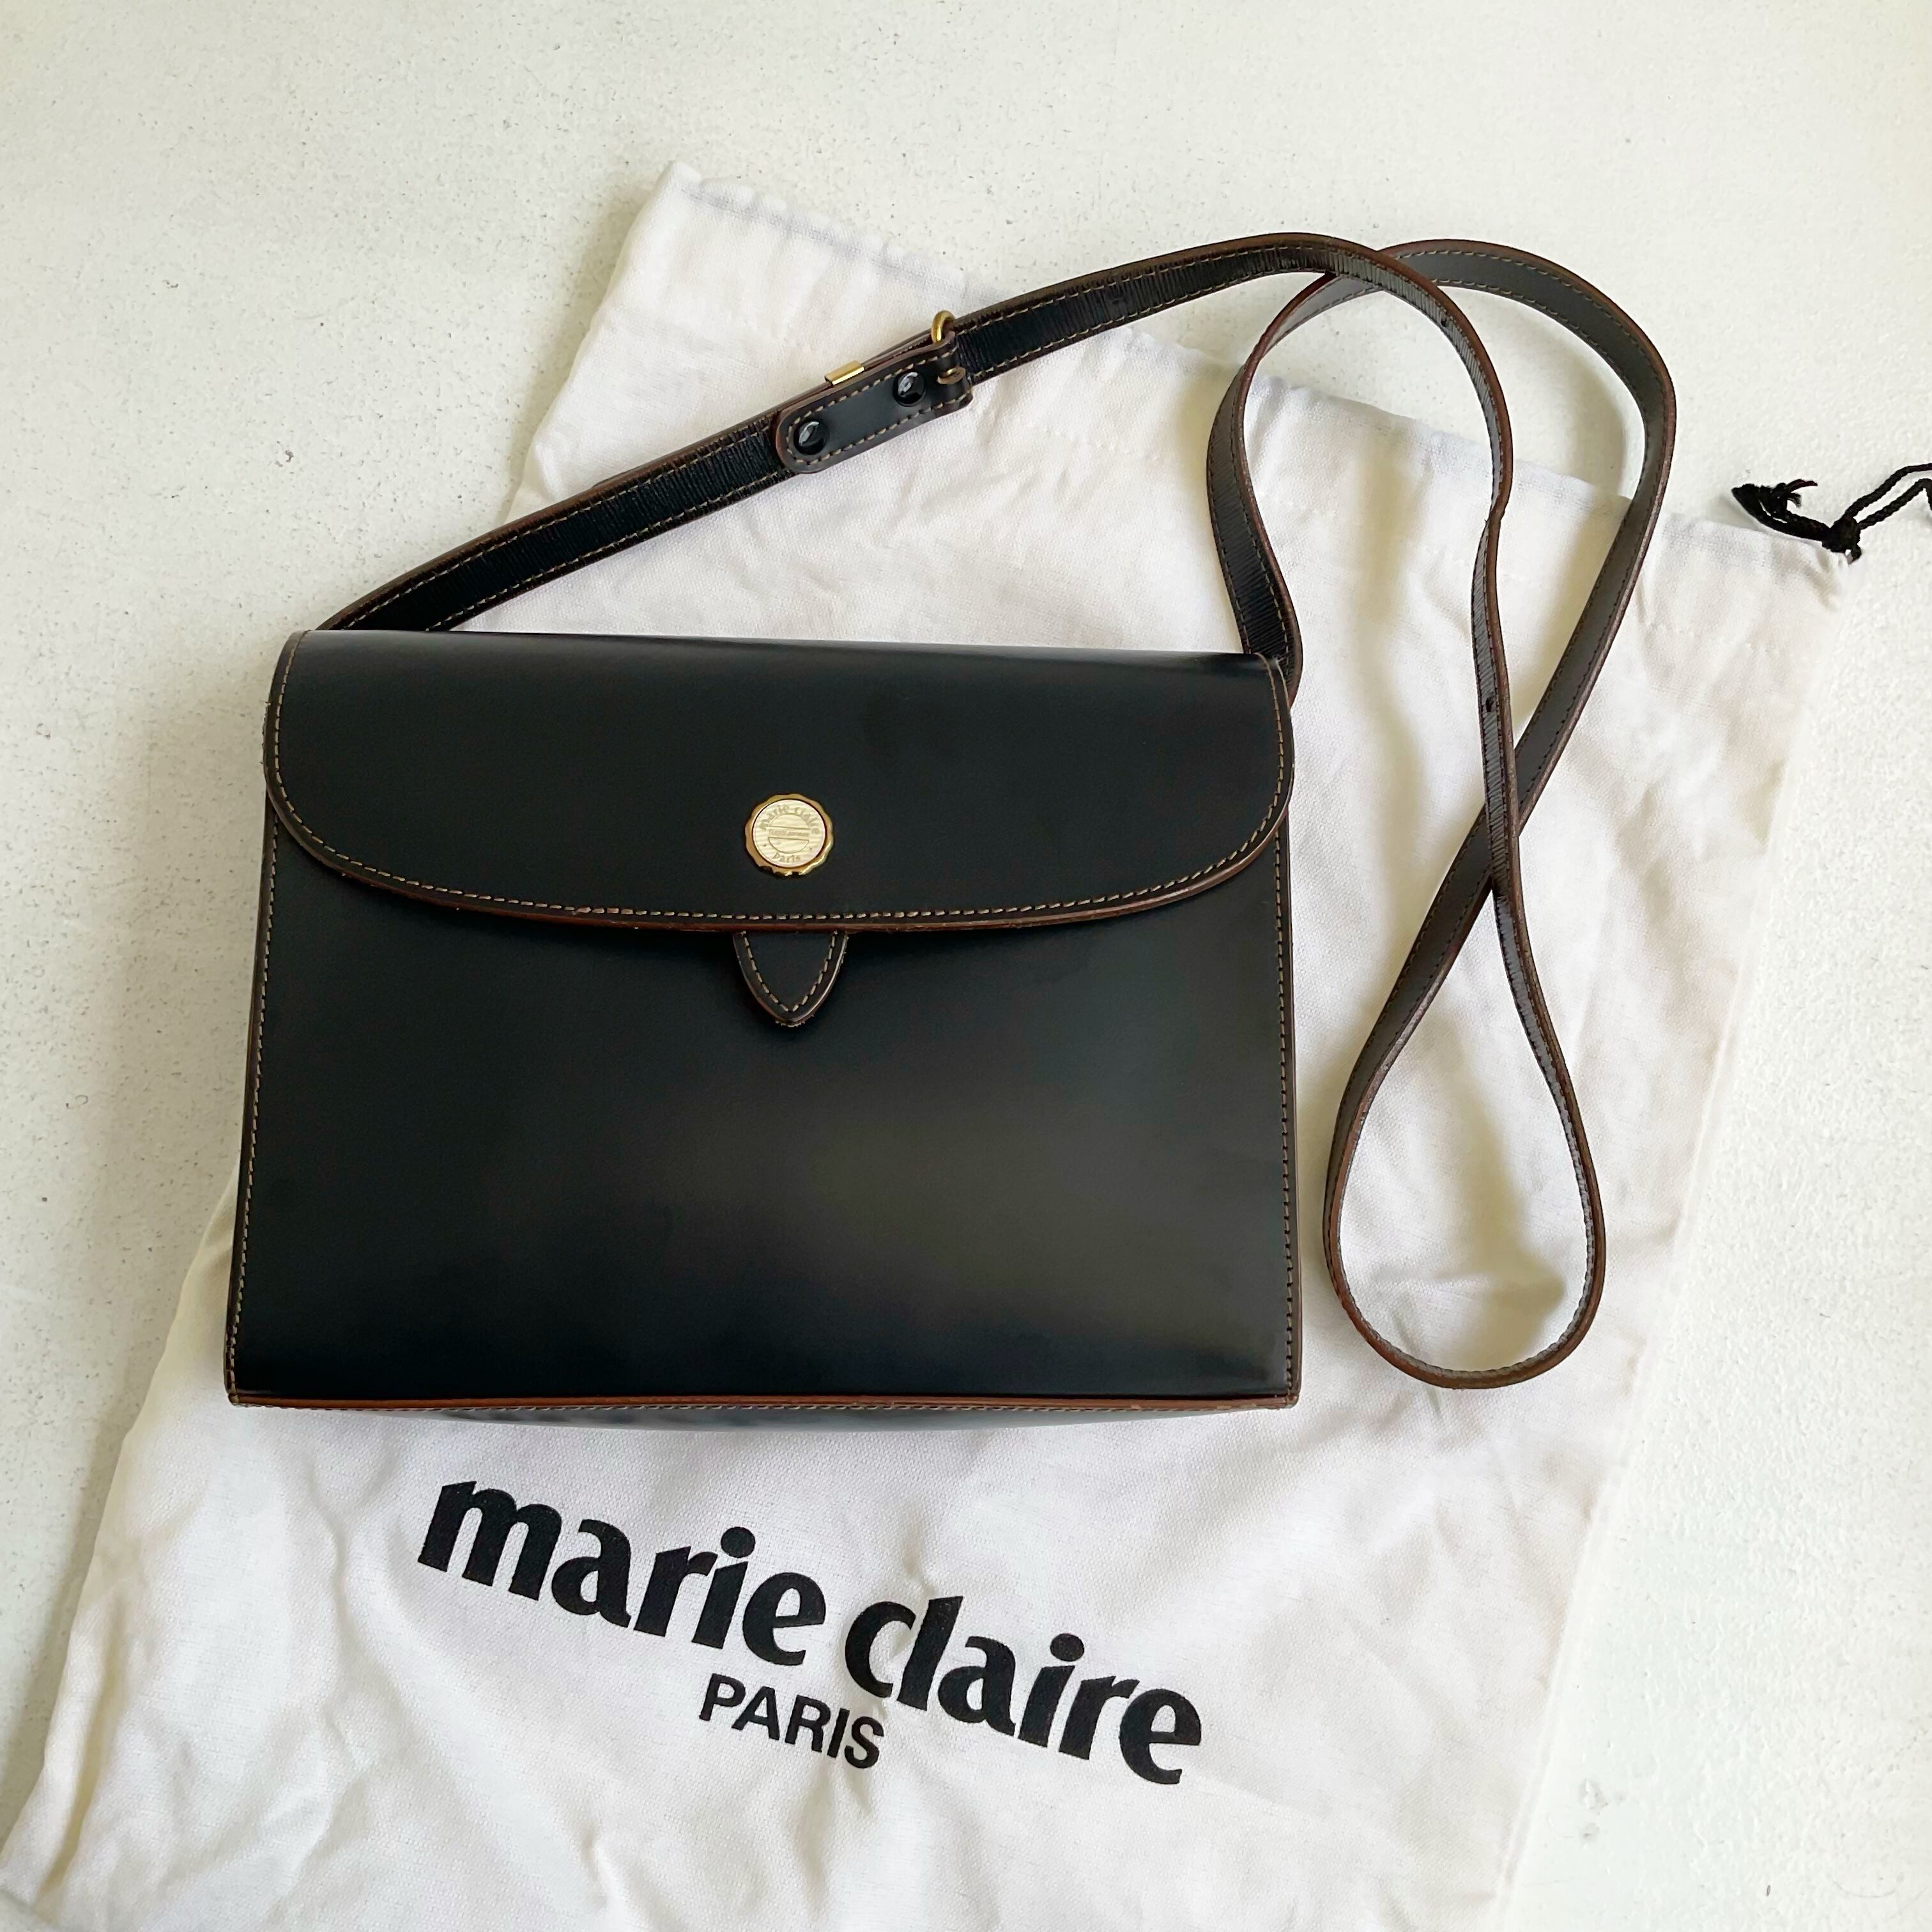 35％OFF】 新品 marie claire sportポロシャツ、グレスパリスバッグ2点 